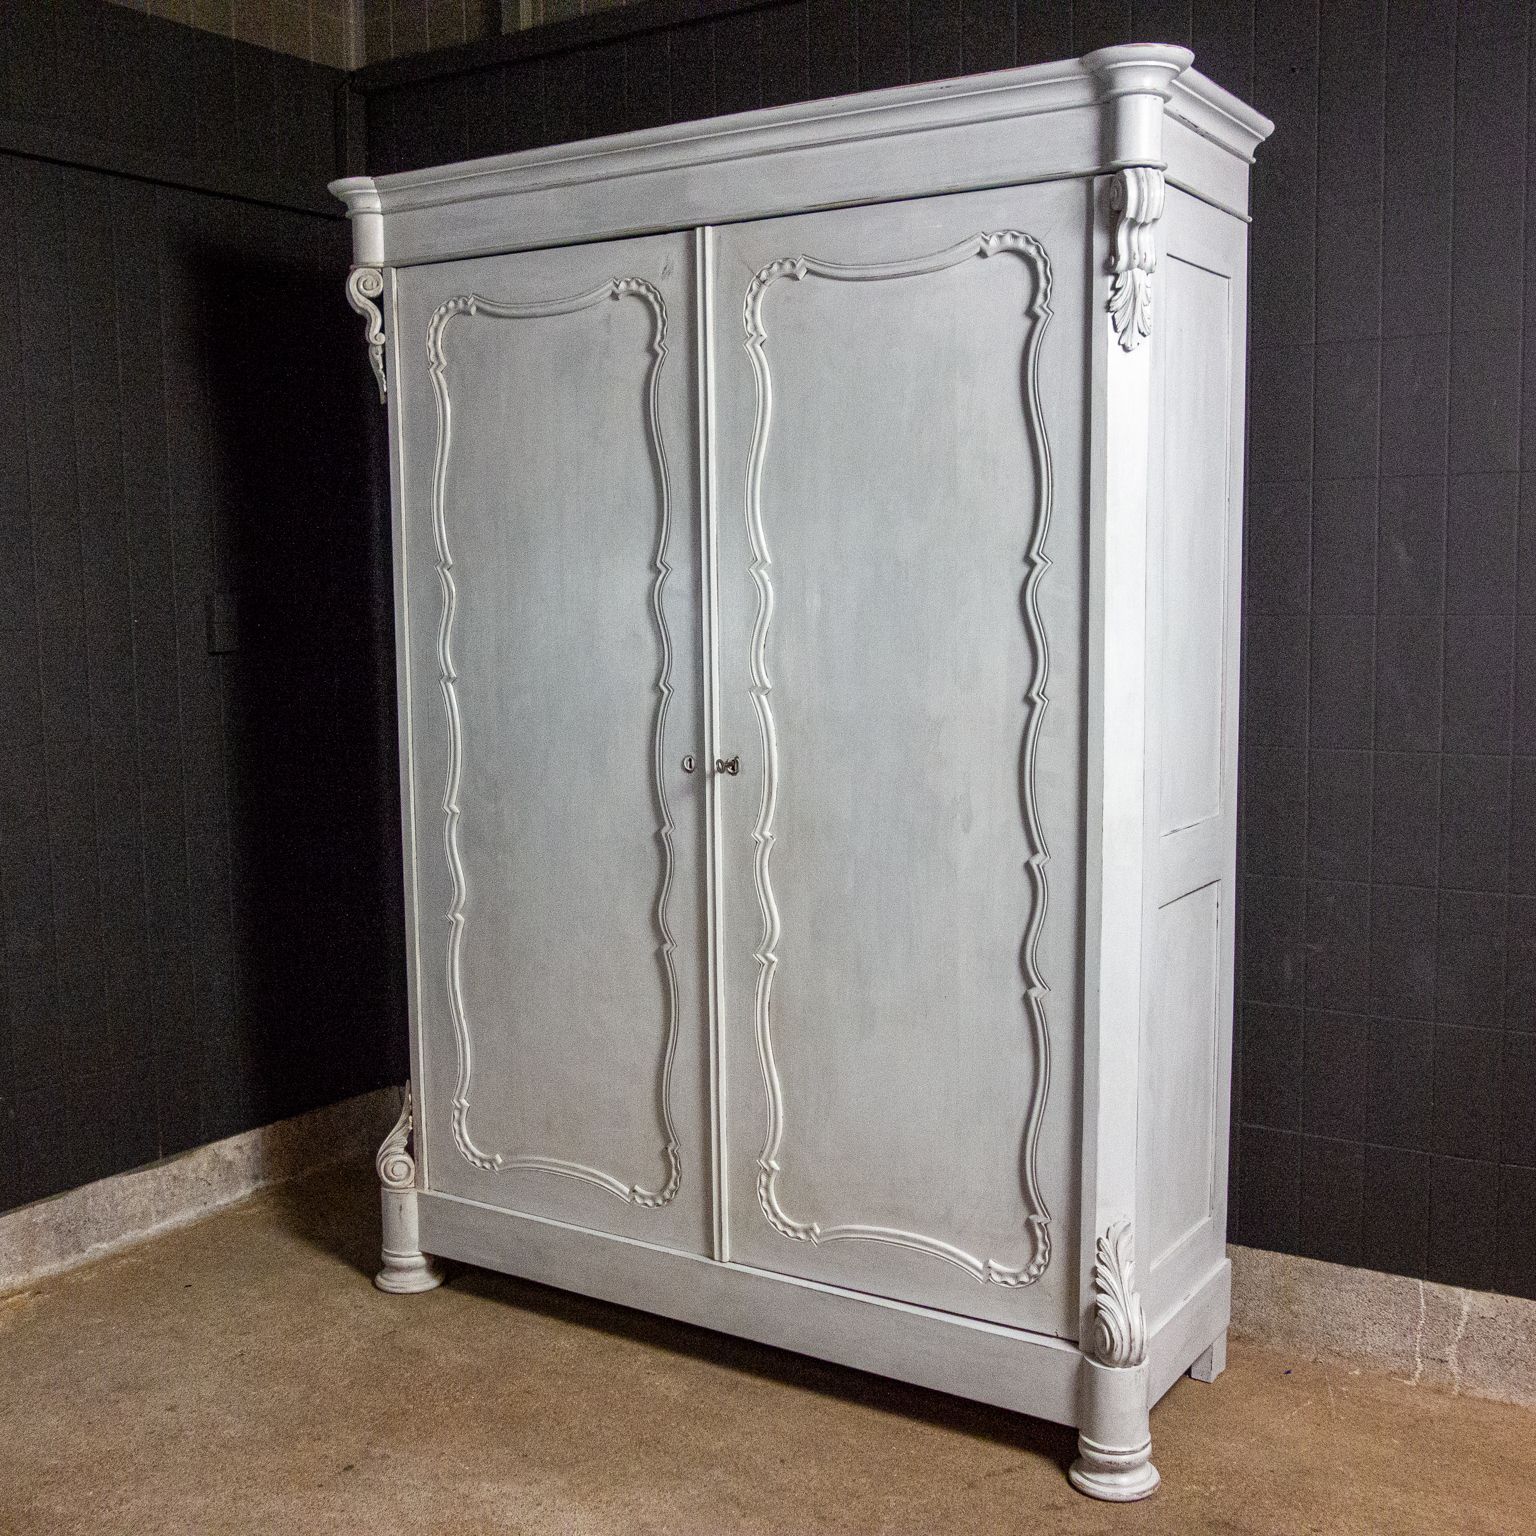 Antique White Wardrobe – Curated Collection | Vinterior With Regard To Antique White Wardrobes (View 10 of 15)